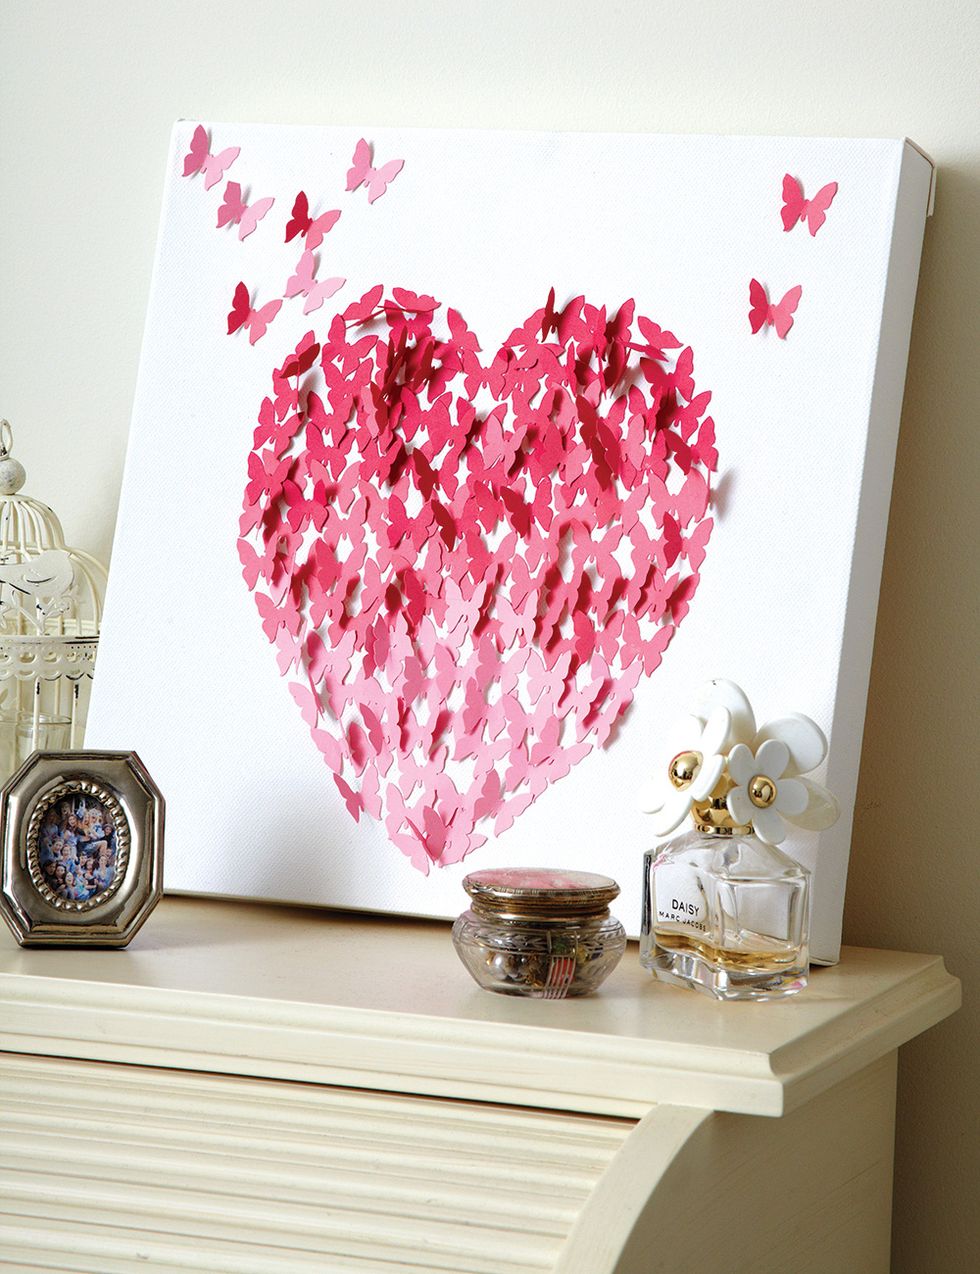 Make Love Heart Canvas Wall Art for Valentine's Day: Homemade